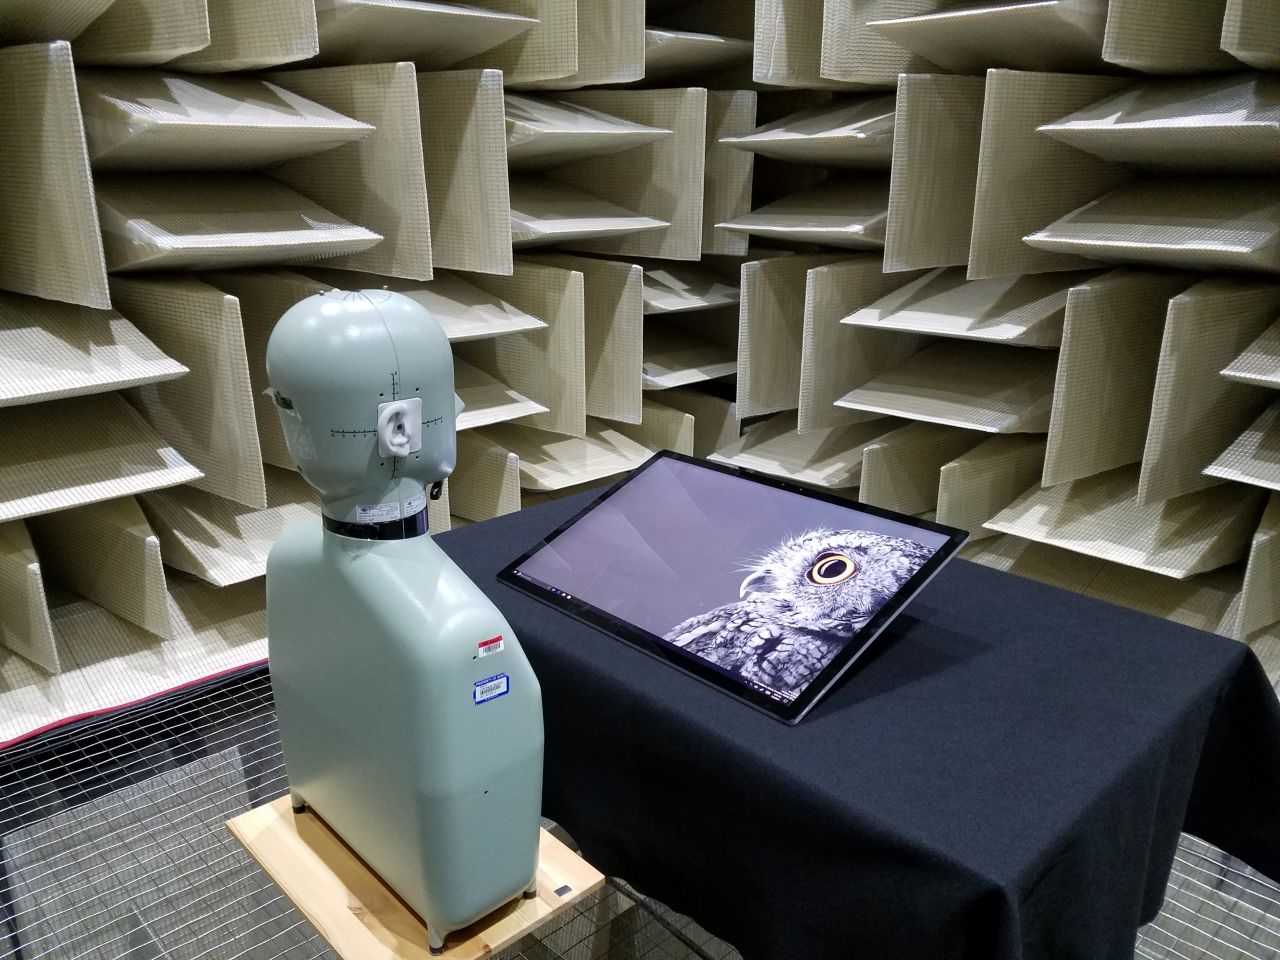 Testing in the Microsoft anechoic chamber.